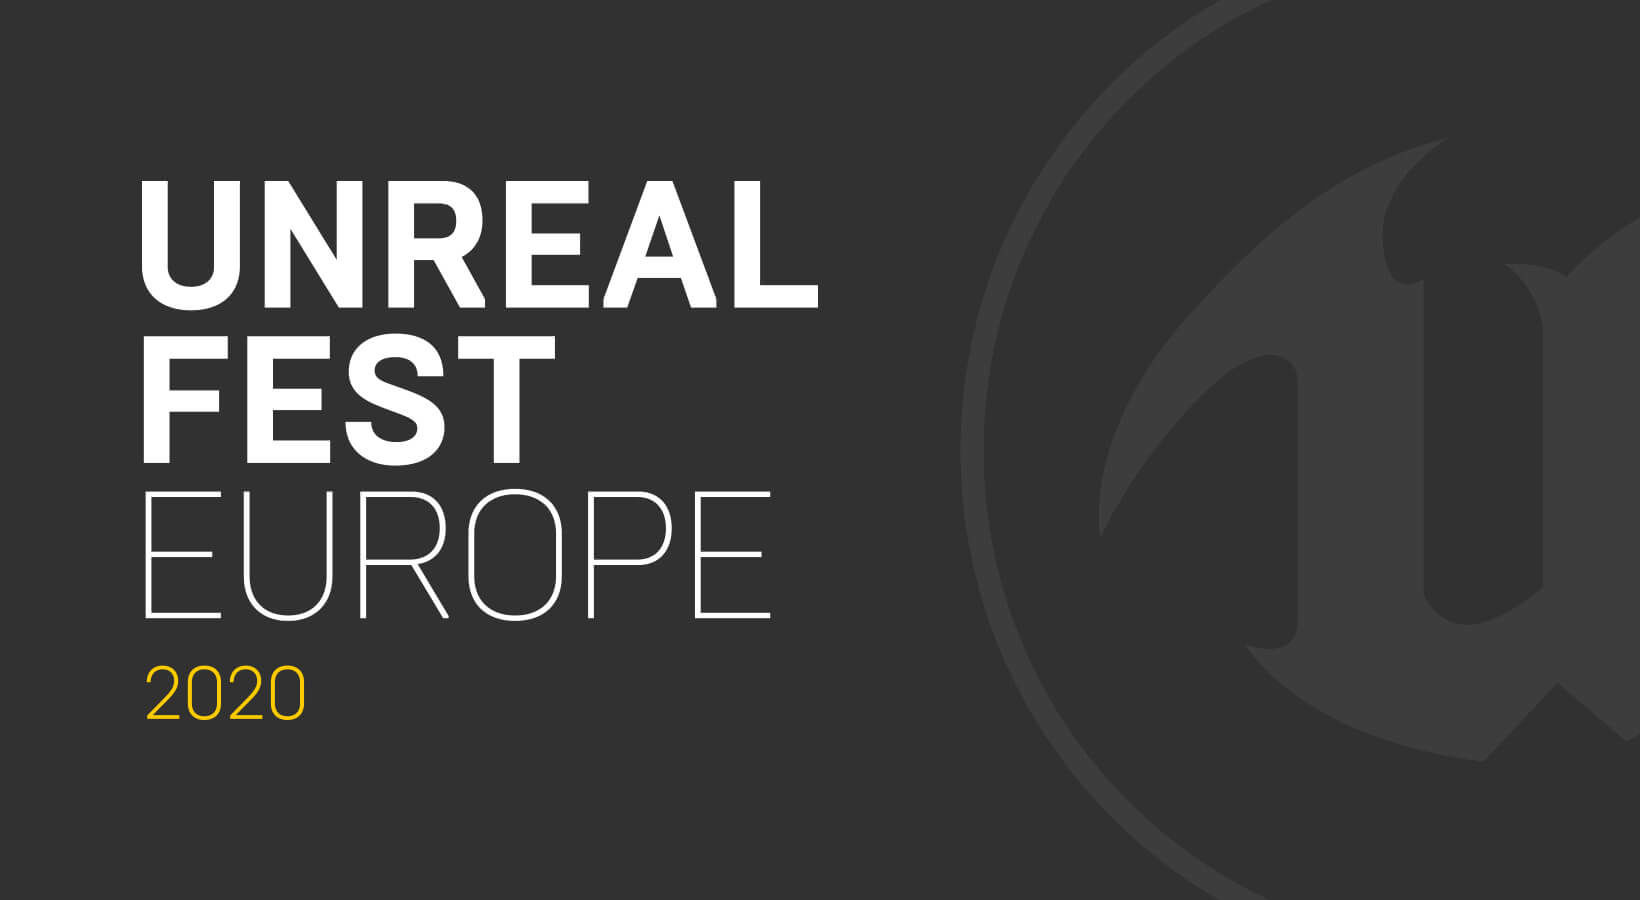 Unreal Fest Europe 2020 Announced